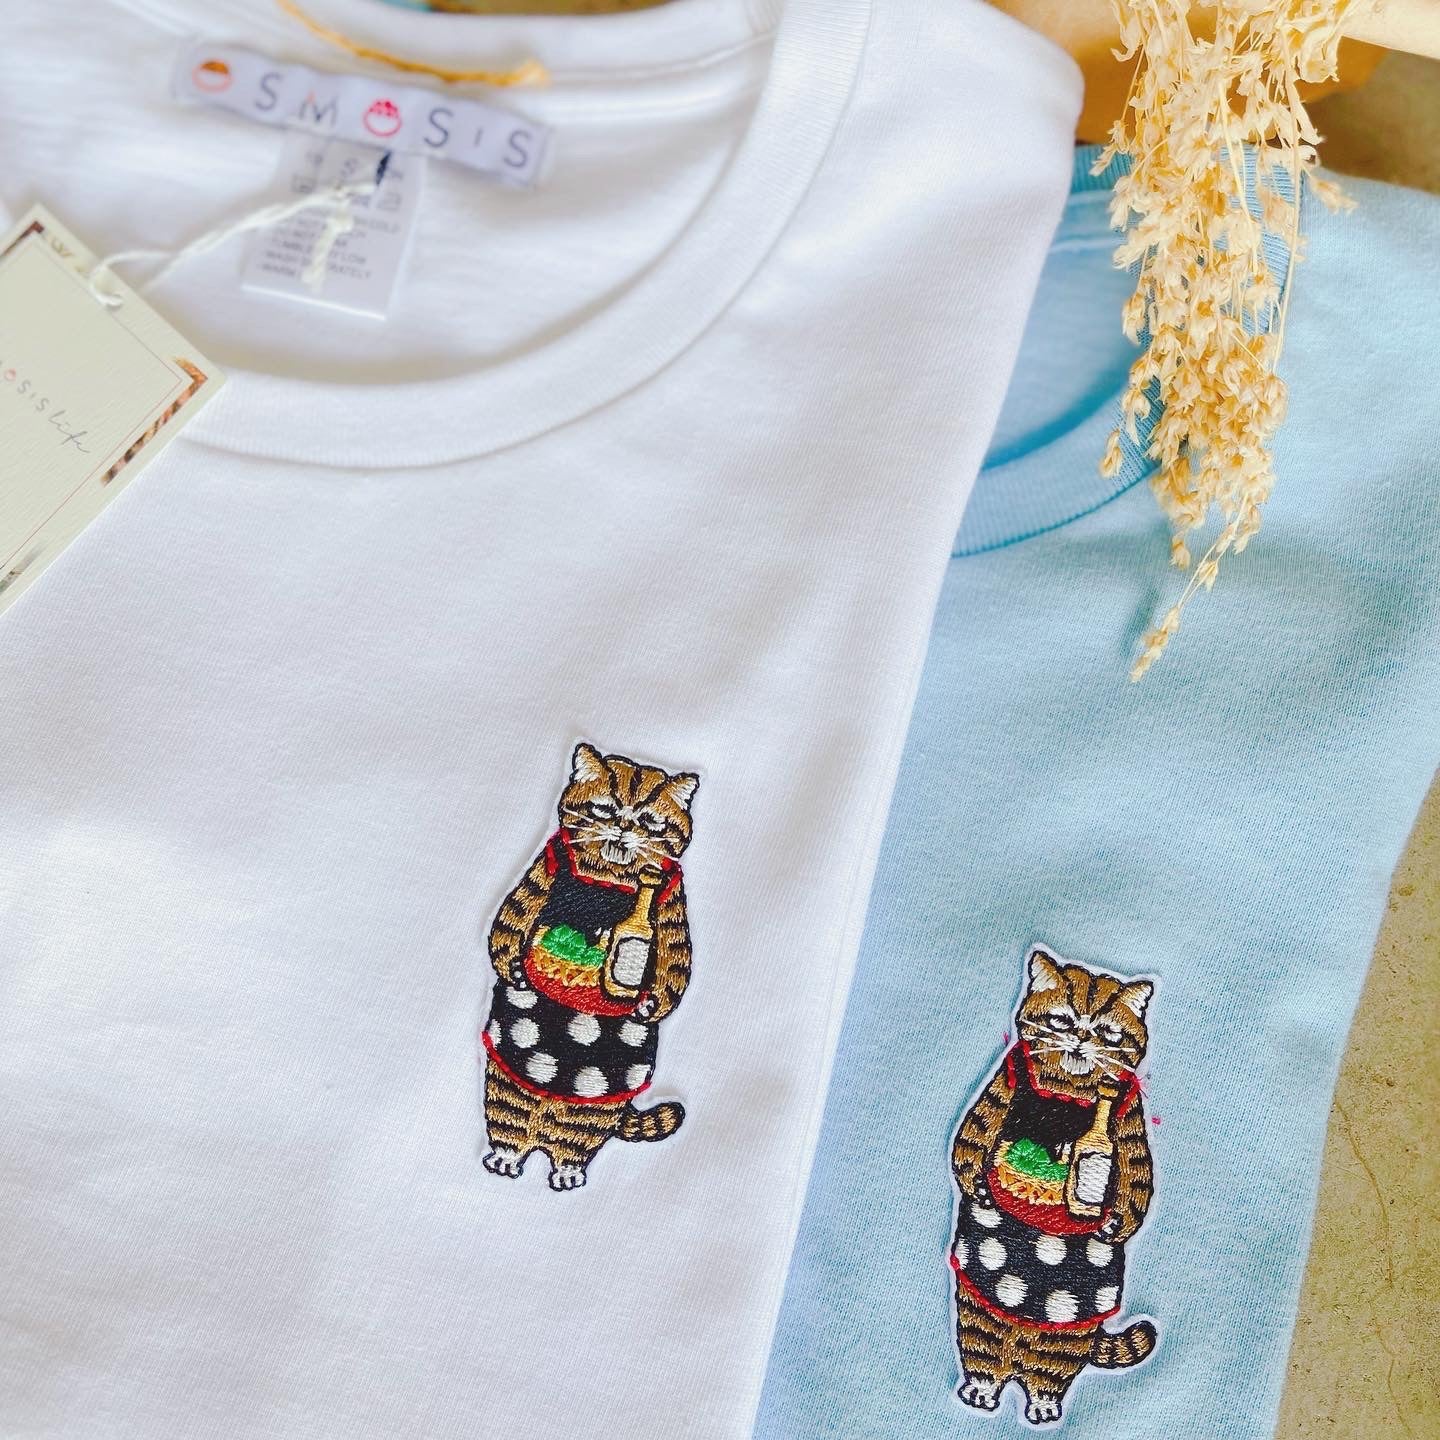 Wine And Cat Lady Embroidery Tee